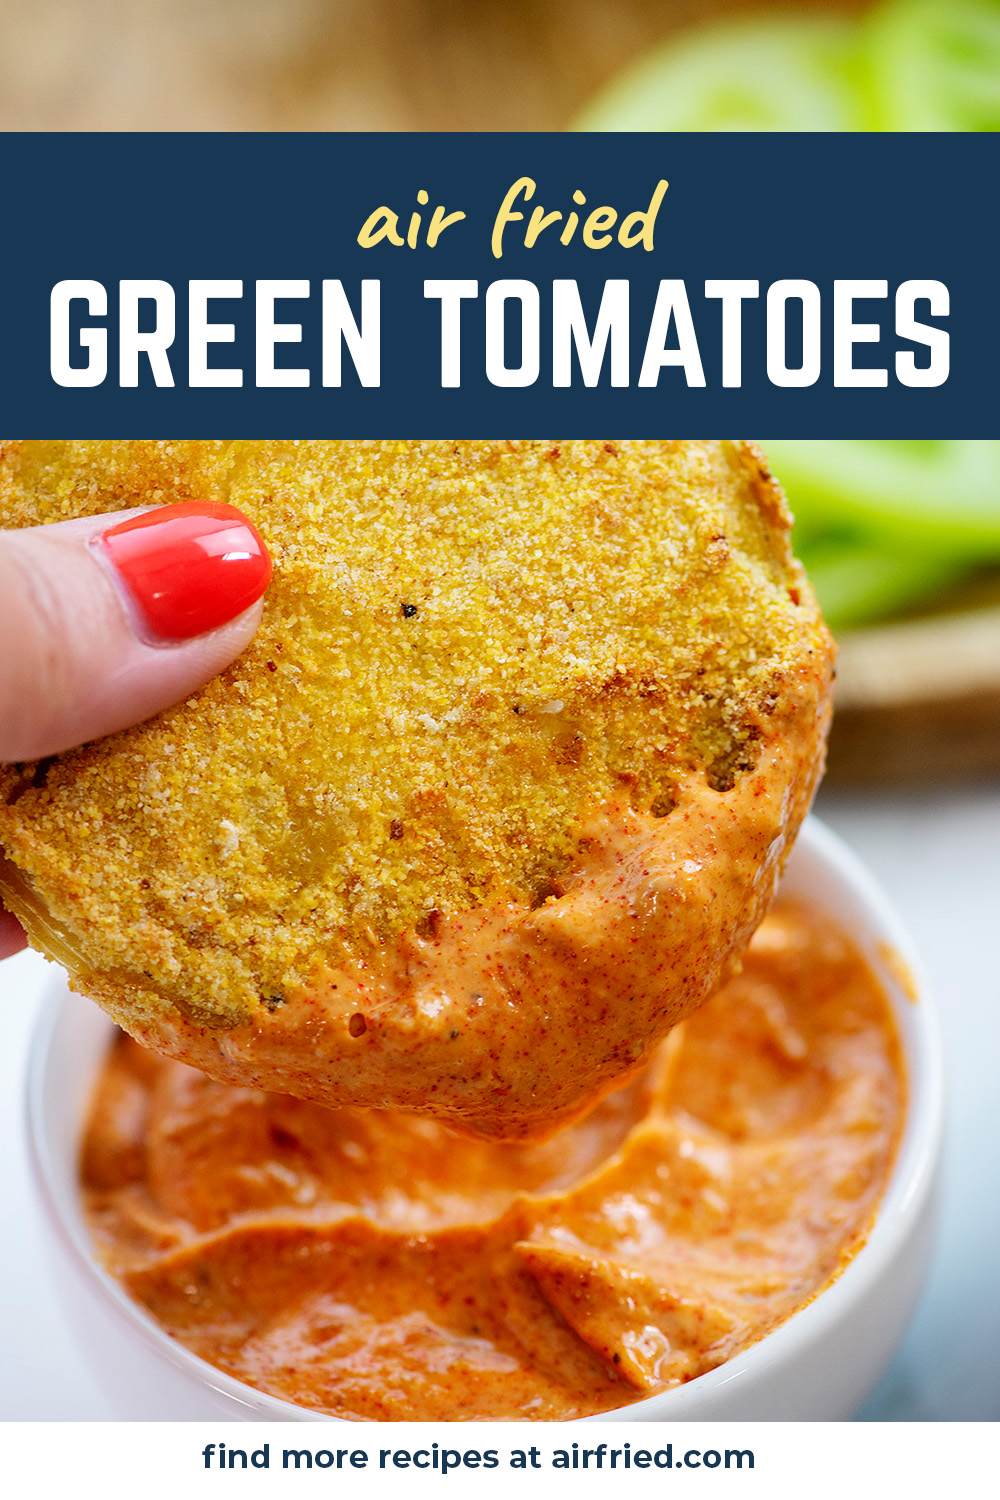 Fried green tomatoes are a fantastic snack or appetizer.  So simple to make, and super tasty!